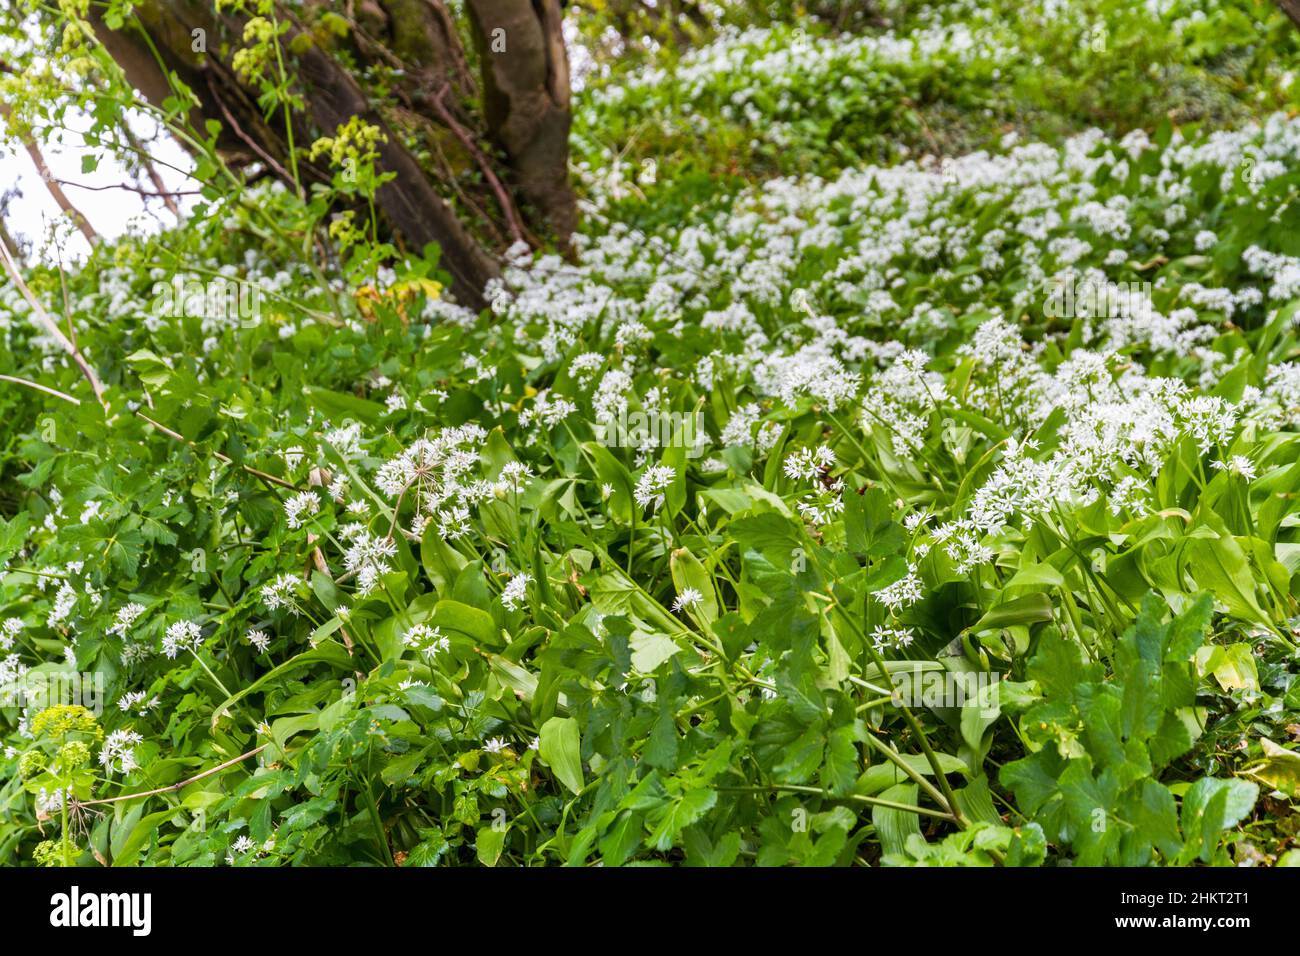 Background or texture of bank of wild garlic green with white flowers. Stock Photo